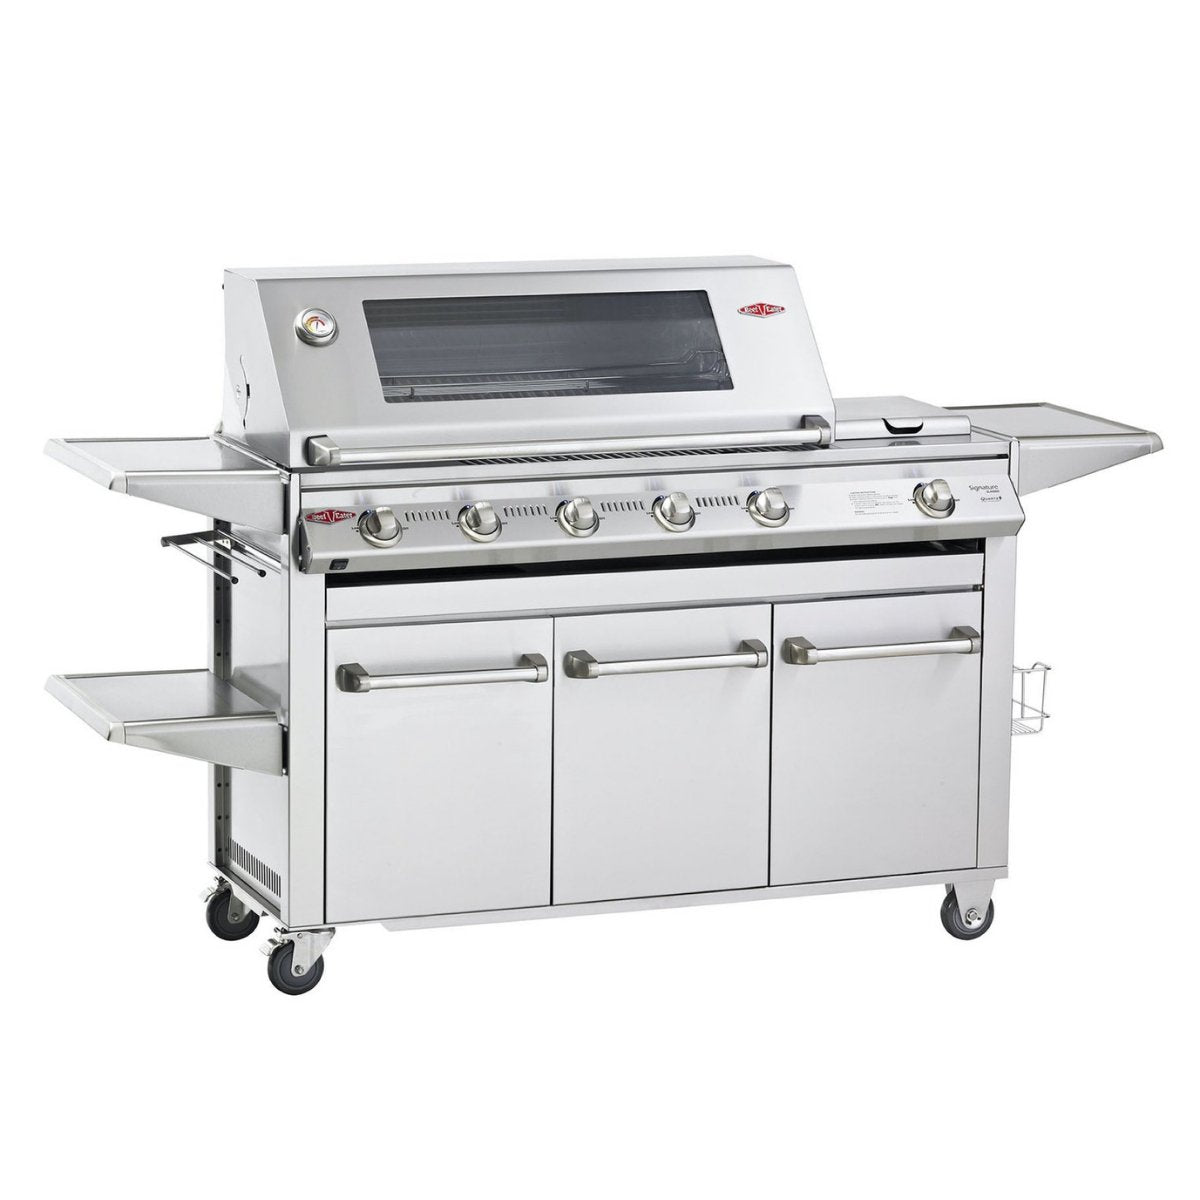 Beefeater SL4000S 5+1 Burner Grill and Side Burner with Cart - Kitchen In The Garden